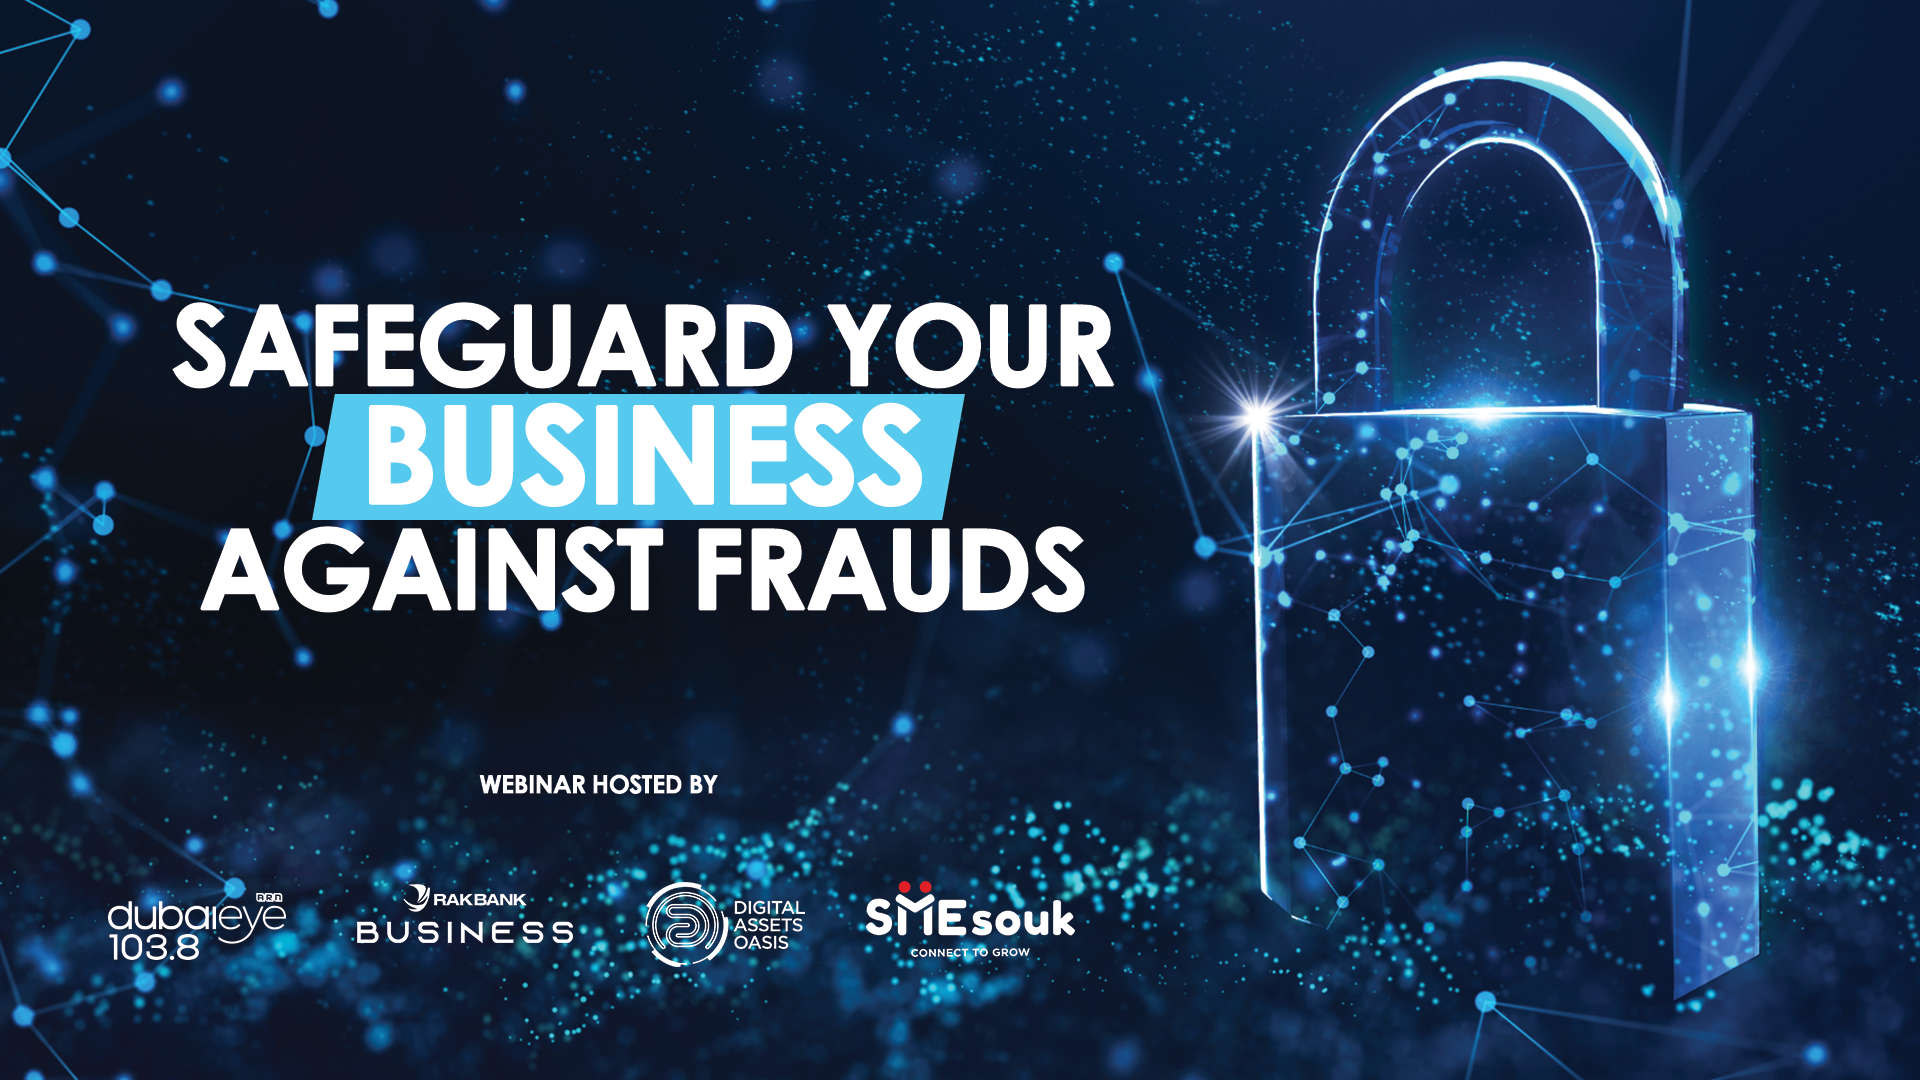 JOIN OUR EXCLUSIVE WEBINAR ON BANKING FRAUD PREVENTION